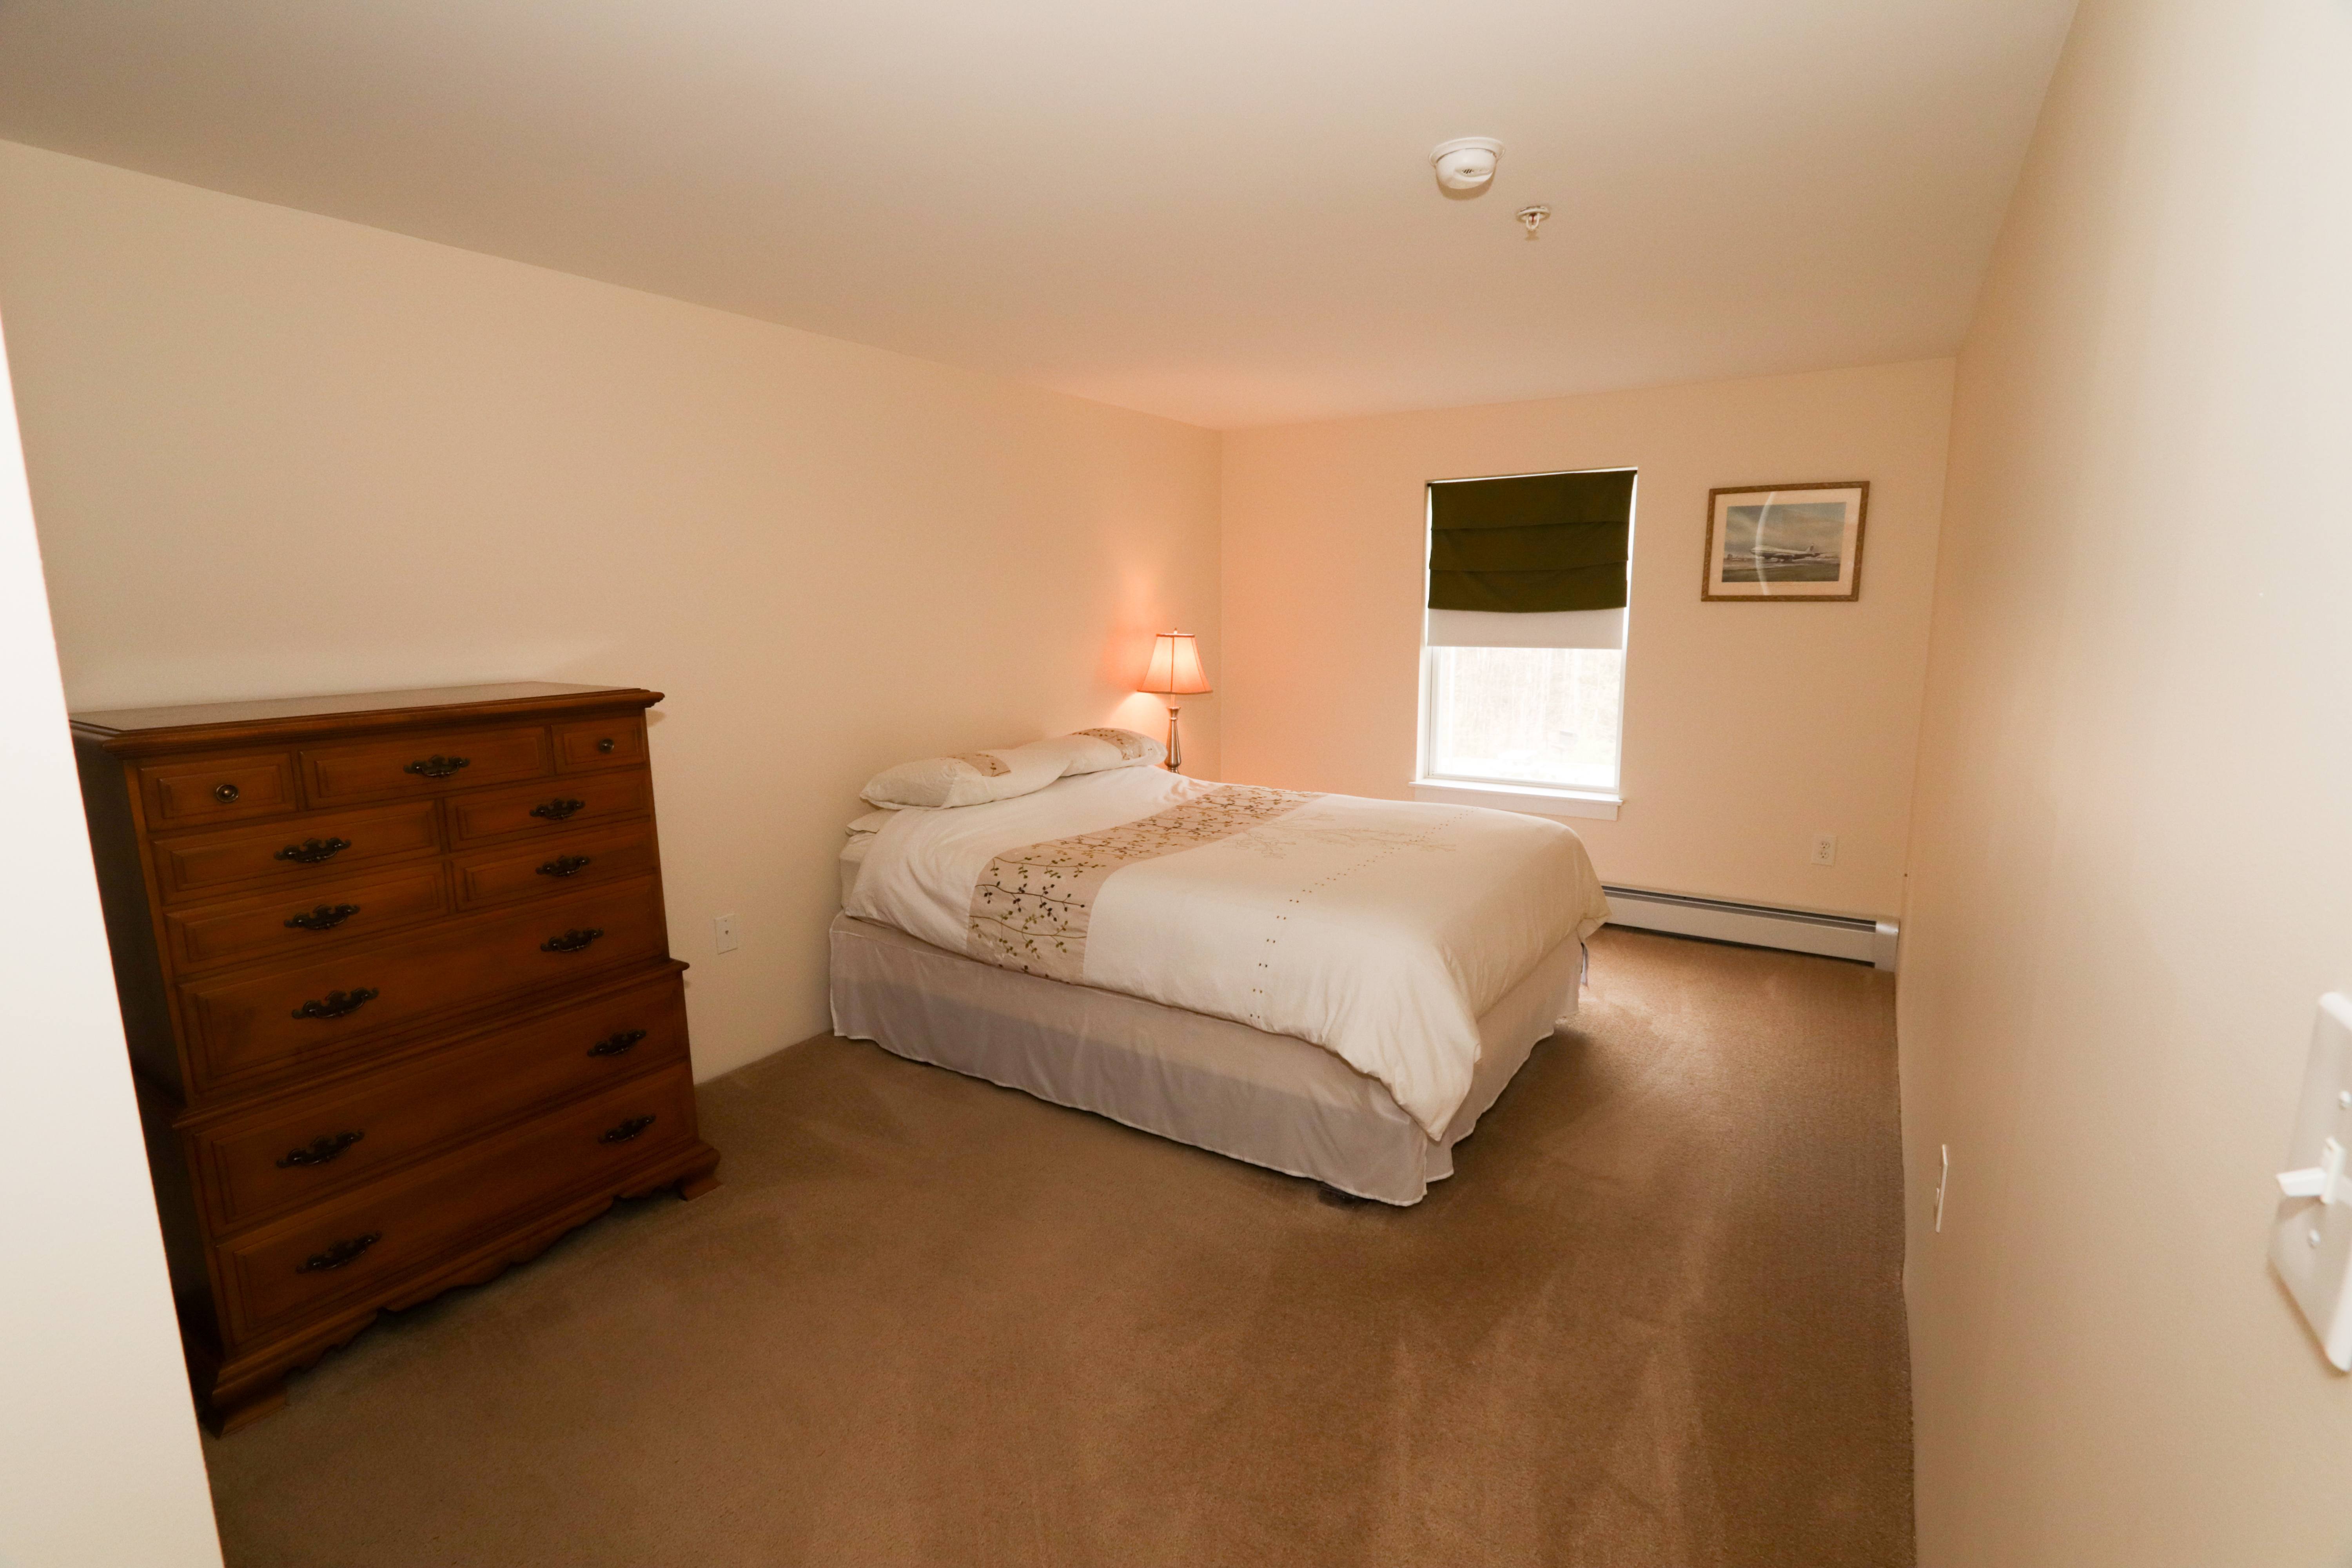 Milford condo for sale at Quarrywood Green 59 Ponemah Hill Rd Apt 2-LL2 Milford NH 03055 bedroom 2